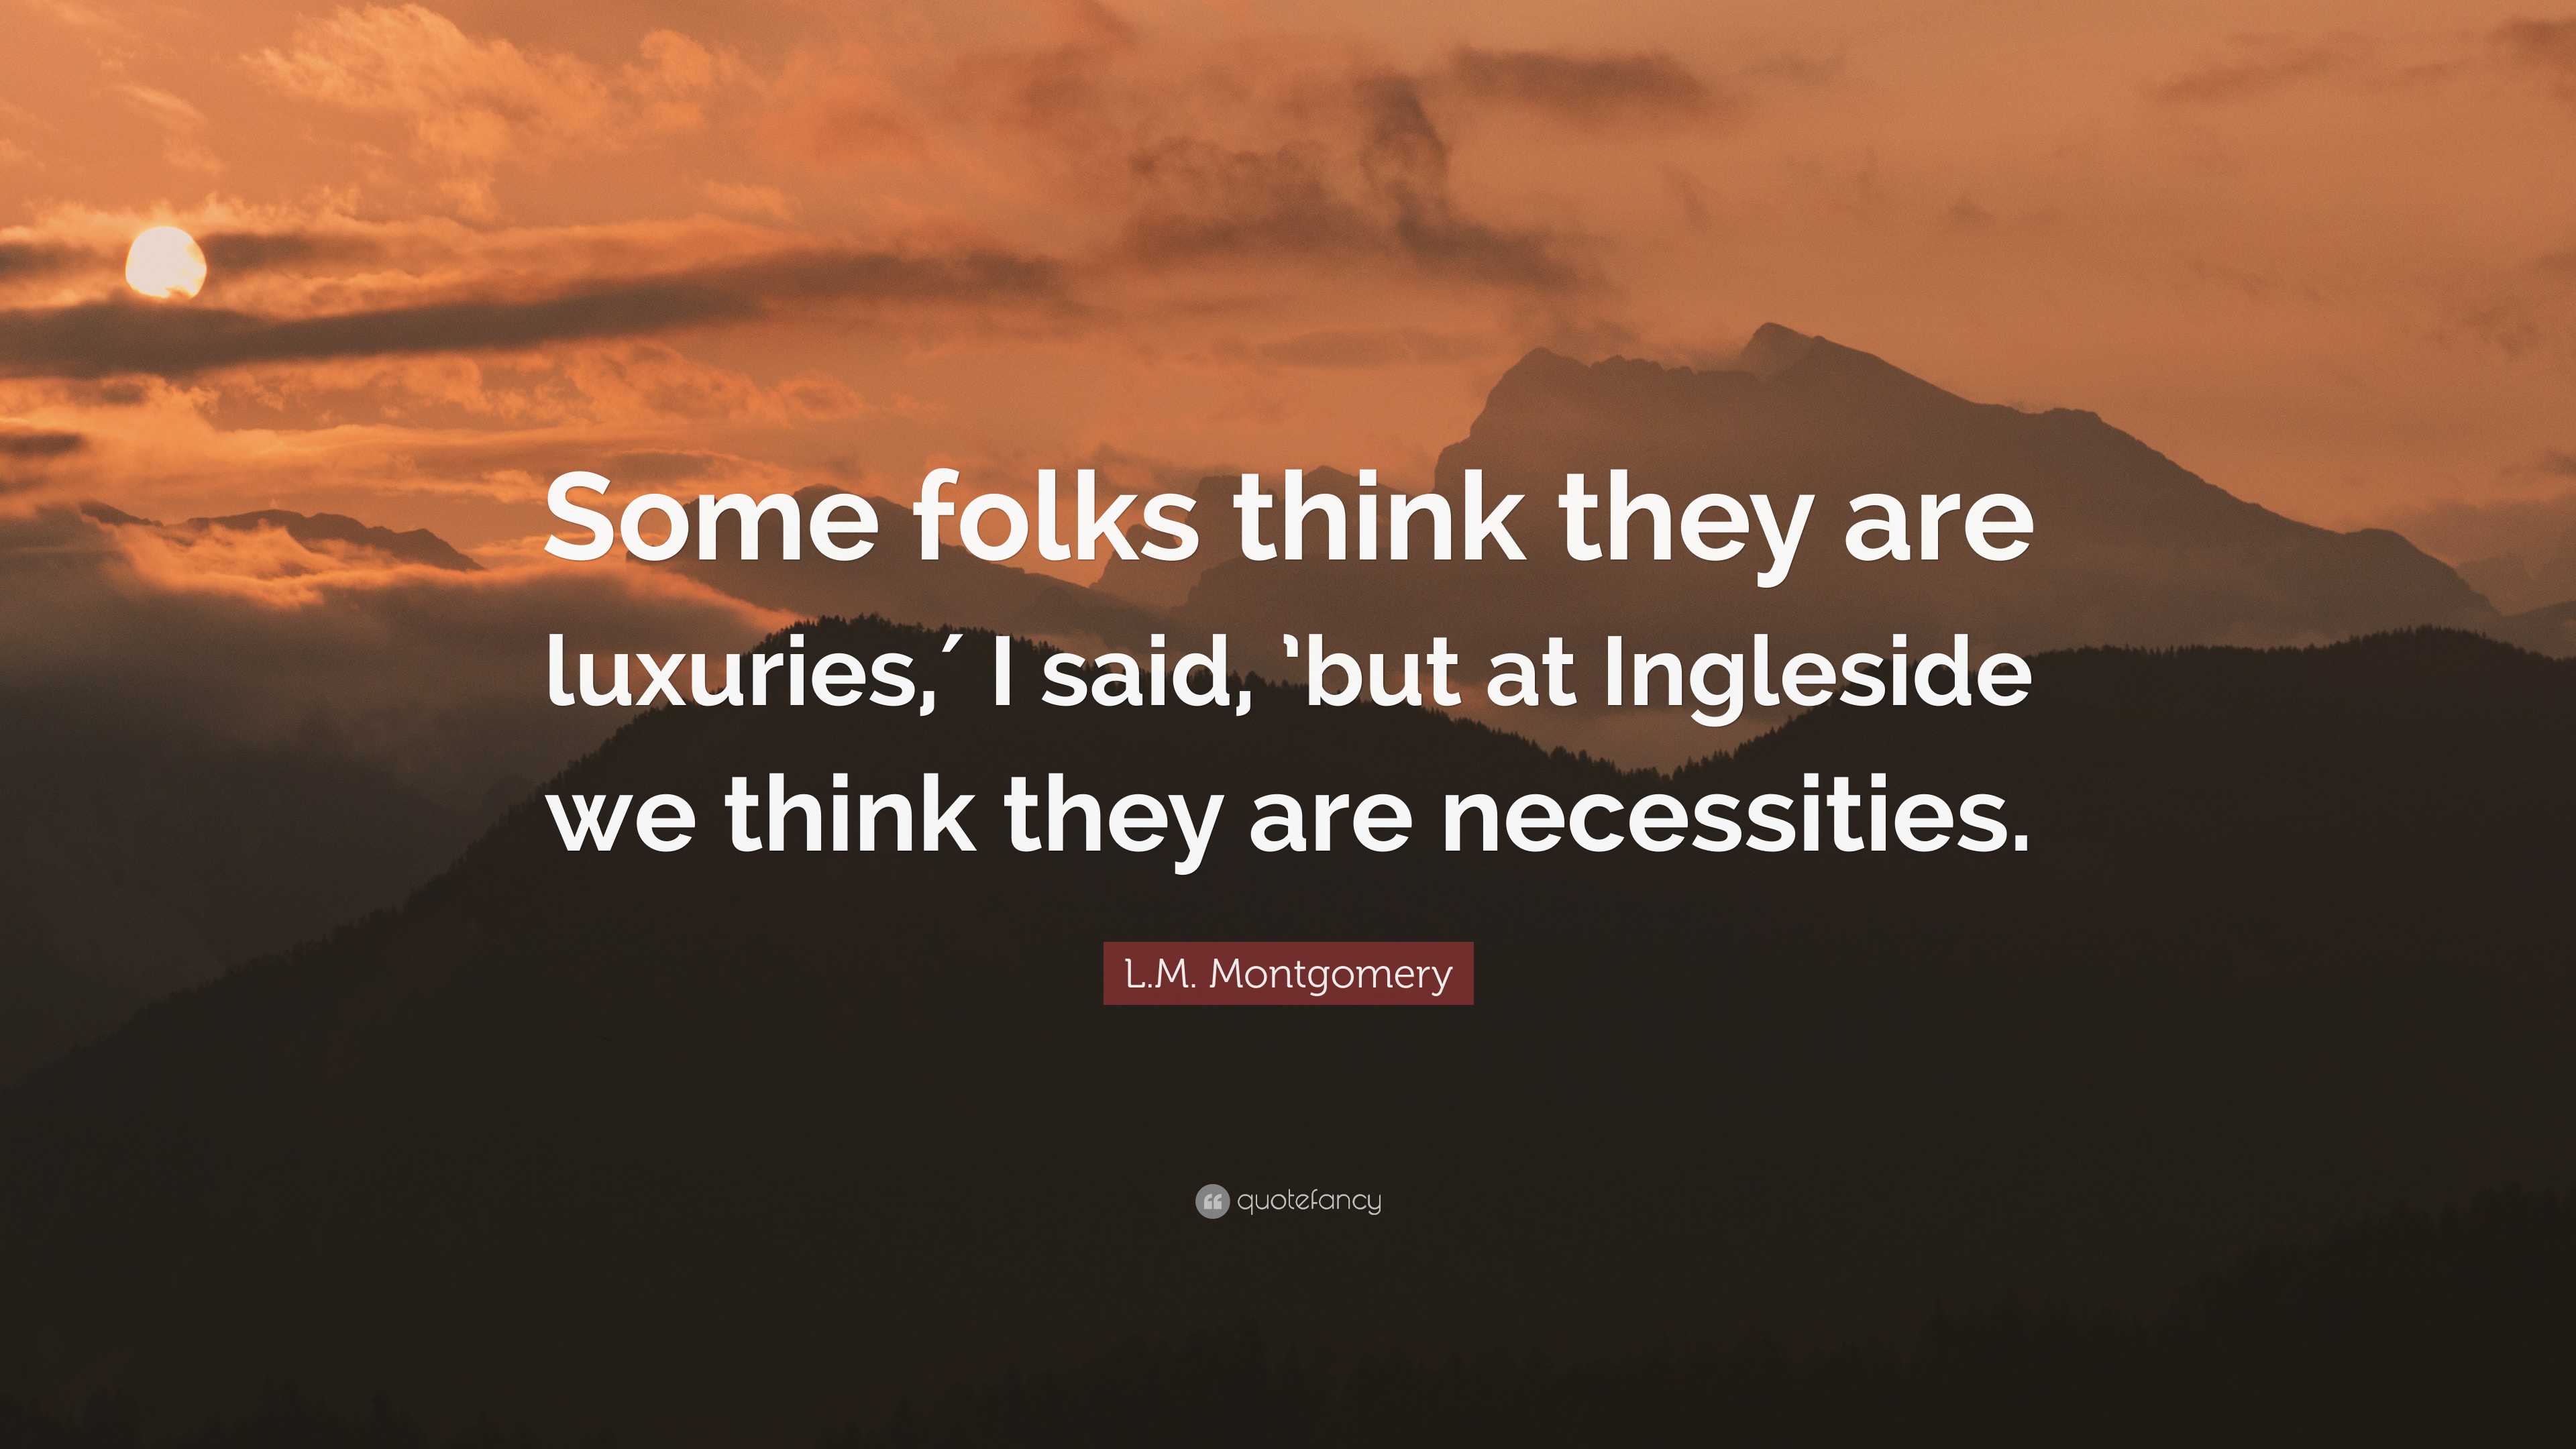 L.M. Montgomery Quote: “Some folks think they are luxuries,′ I said ...